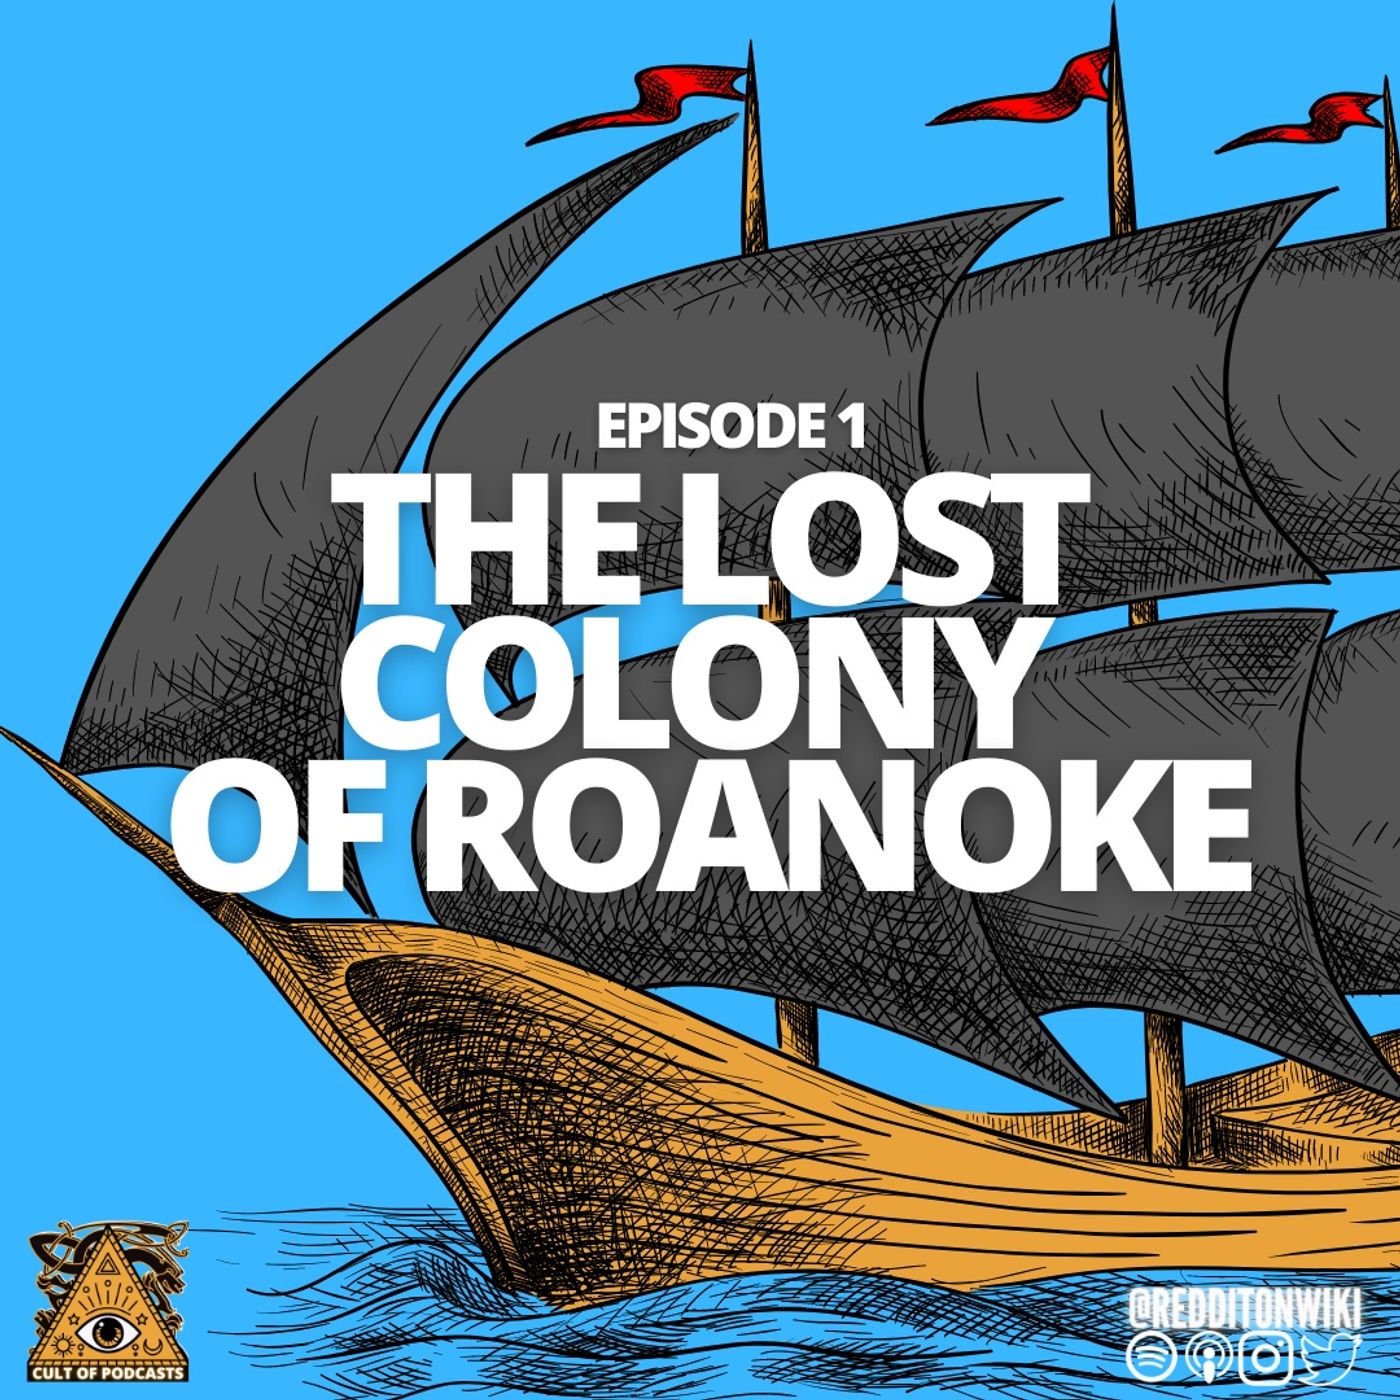 The Lost Colony Of Roanoke